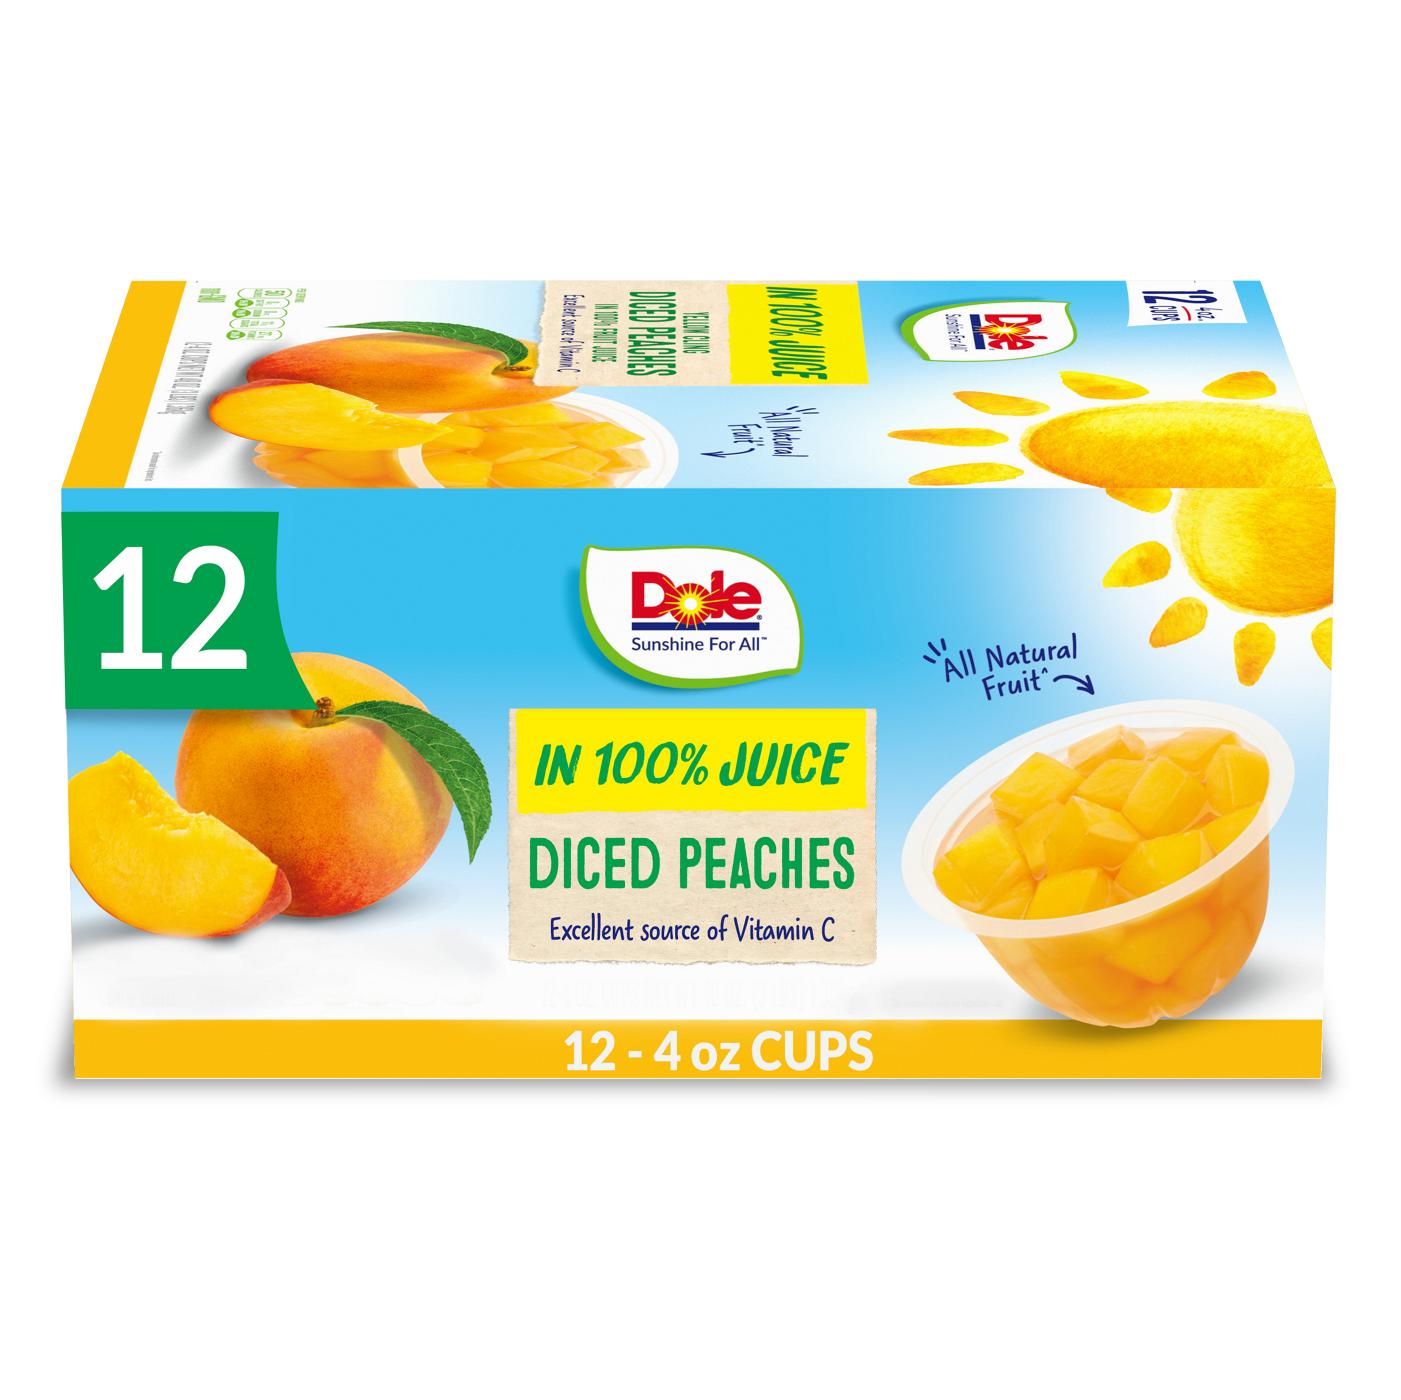 Dole Fruit Bowls - Diced Peaches in 100% Juice; image 8 of 8